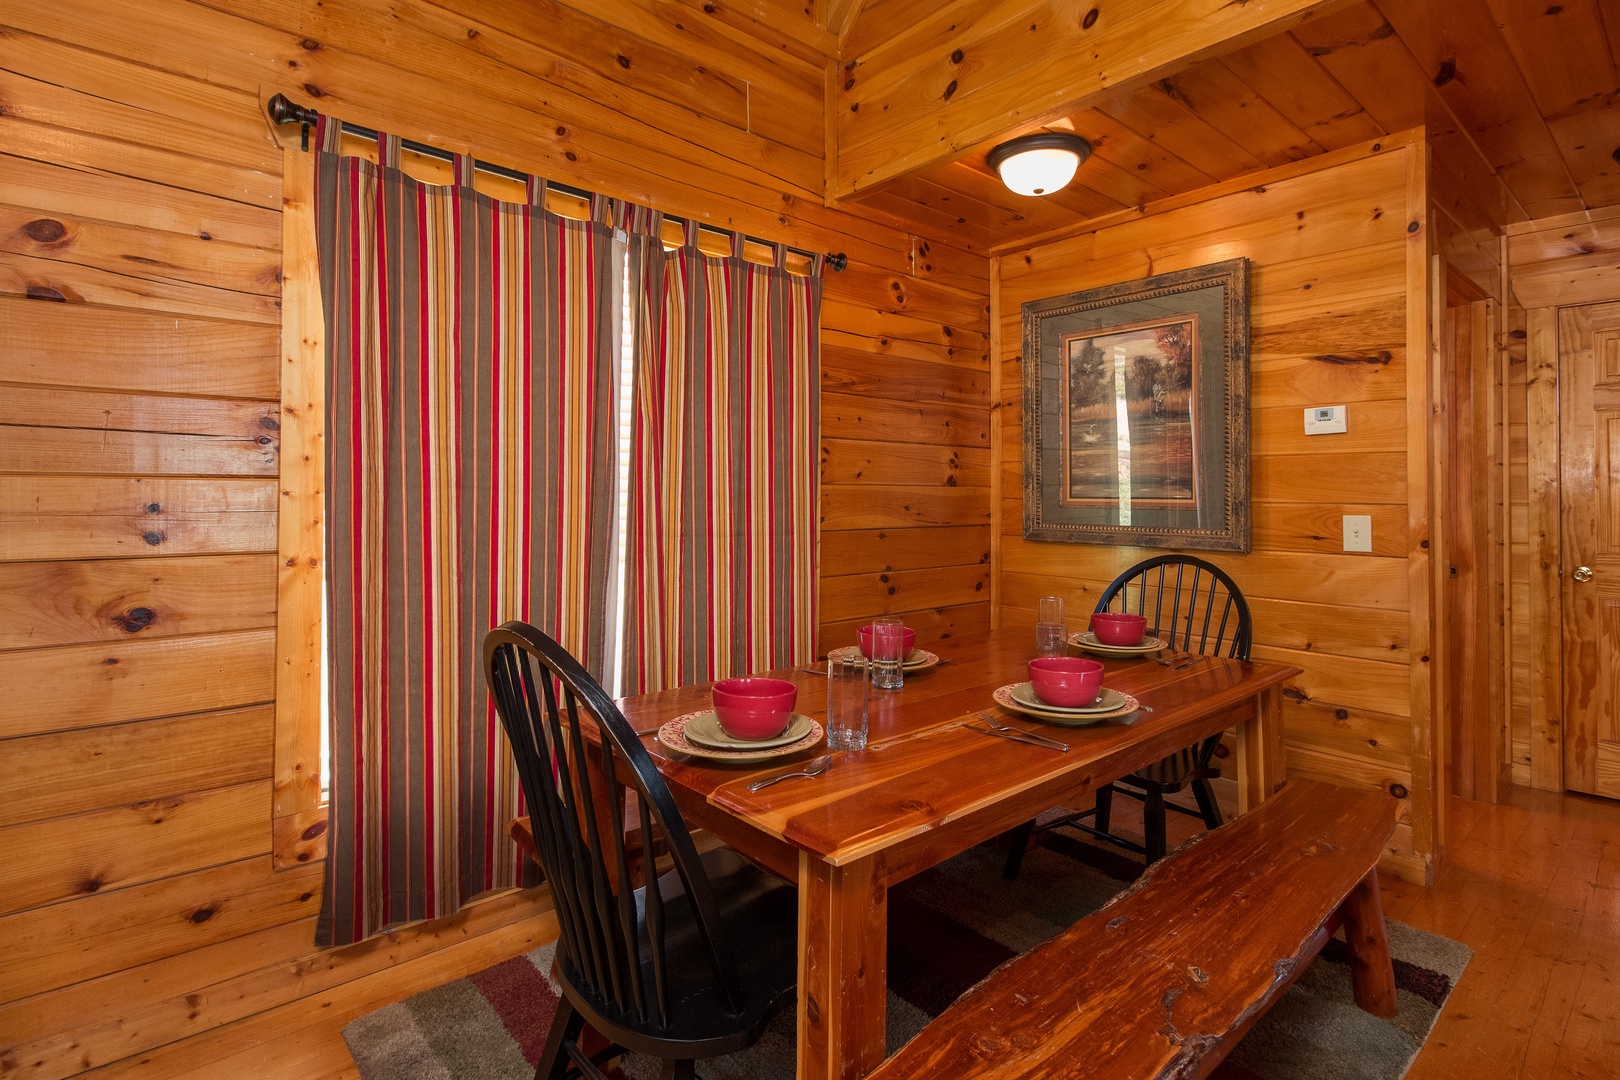 Dining table for six at A Beautiful Memory, a 4 bedroom cabin rental located in Pigeon Forge